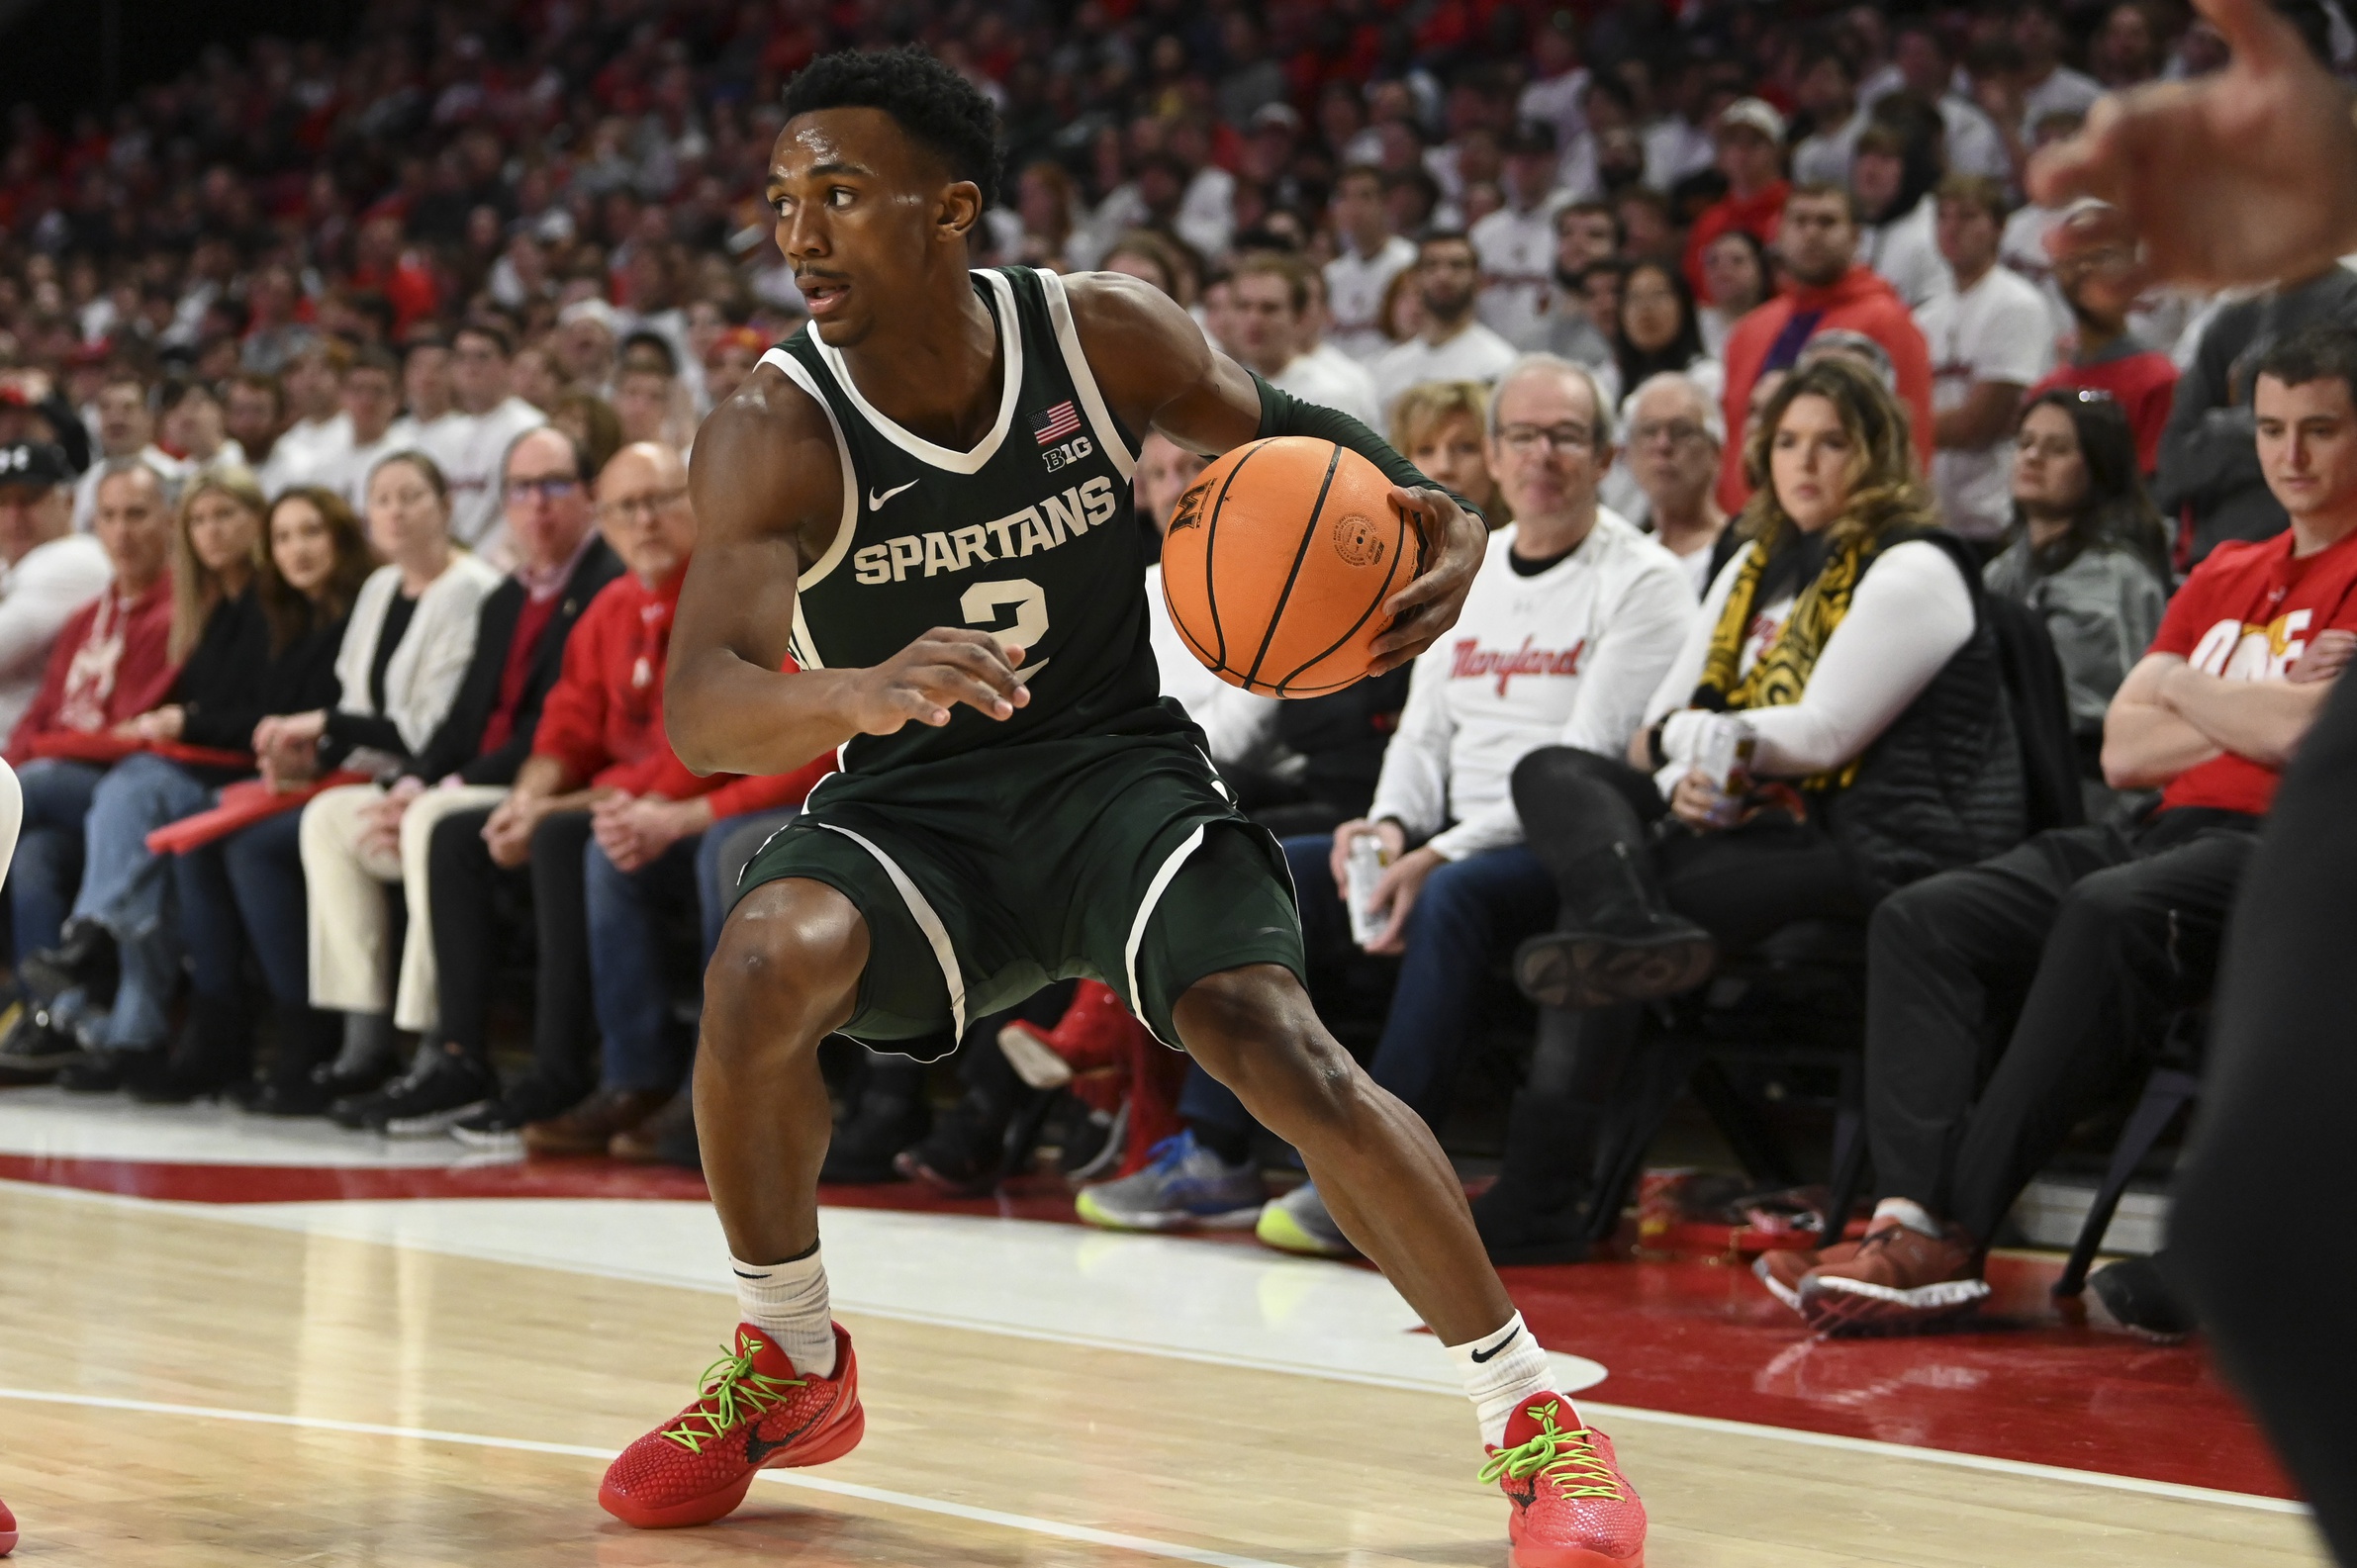 Ranking the best Big Ten basketball players at midway point